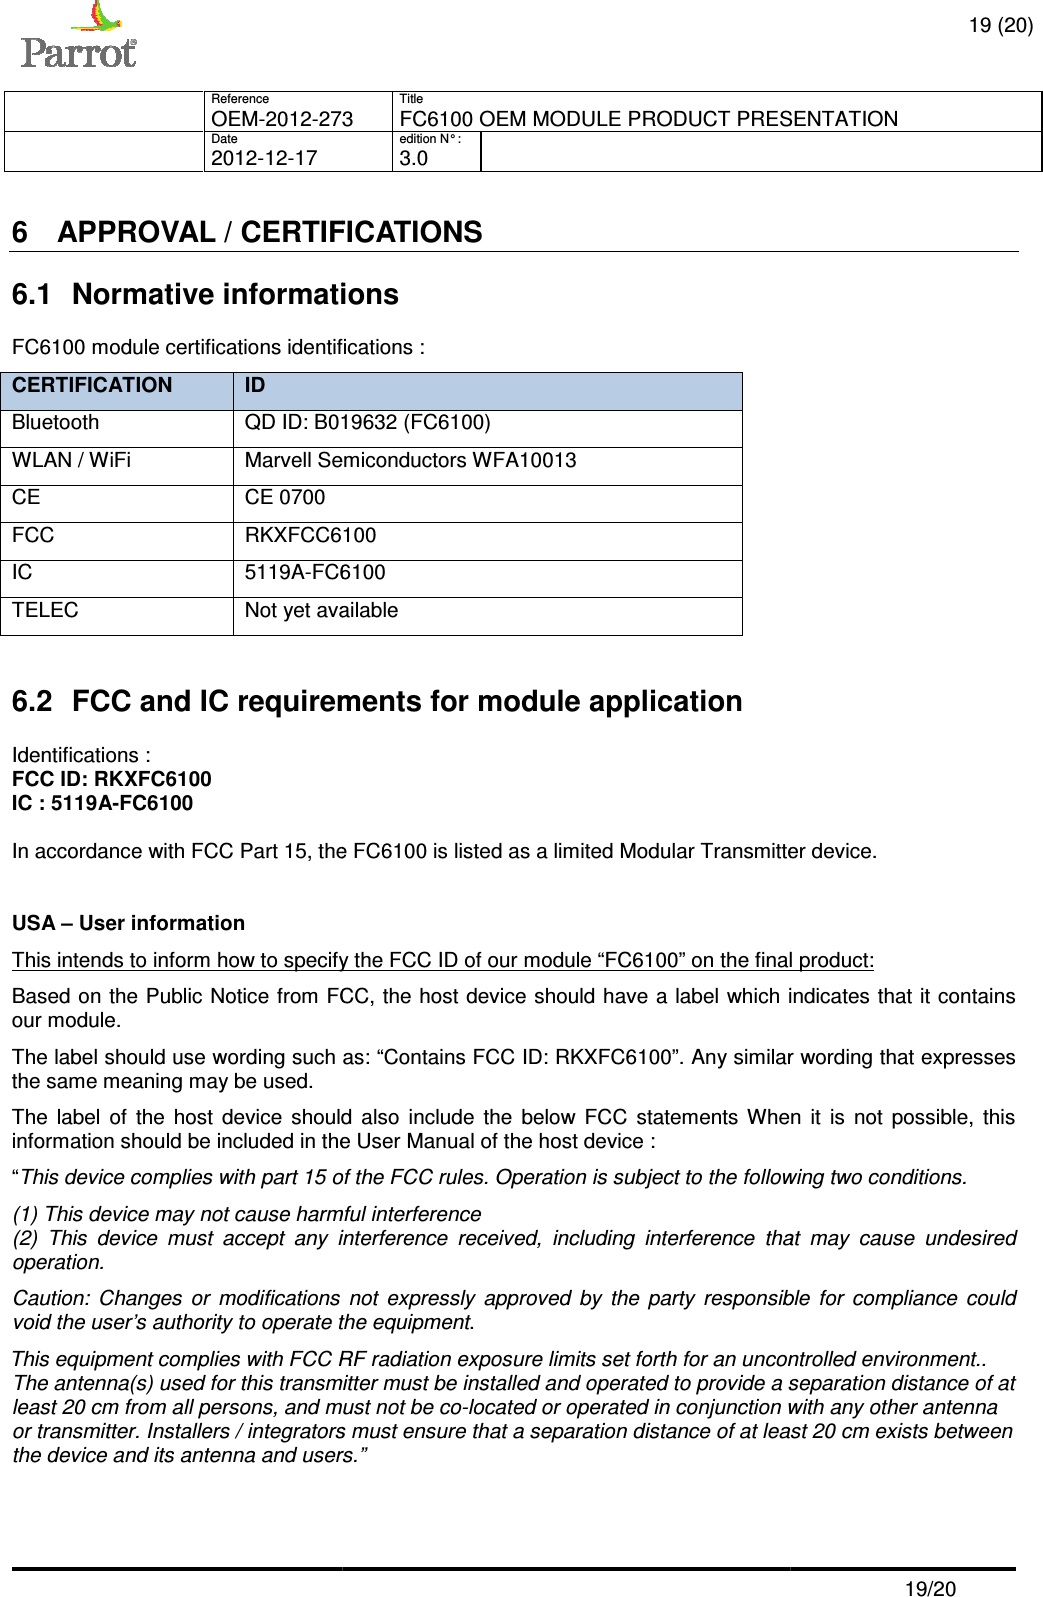     Reference   OEM-2012-273  Date   2012-12-17   6 APPROVAL / CERTIFICA6.1  Normative informationsFC6100 module certifications identifications CERTIFICATION ID Bluetooth QD ID: B019632 (FC6100)WLAN / WiFi Marvell Semiconductors WFA10013CE  CE 0700 FCC RKXFCC6100IC  5119A-FC6100TELEC Not yet available 6.2 FCC and IC requirements for module applicationIdentifications : FCC ID: RKXFC6100 IC : 5119A-FC6100  In accordance with FCC Part 15, the  USA – User information This intends to inform how to specify the FCC ID of our module “Based on the Public Notice from FCC, the host device should have a label which indicatour module. The label should use wording such as: “Contains FCC ID: RKXthe same meaning may be used. The  label  of  the  host  device  should  also  include  the  below  FCC information should be included in the“This device complies with part 15 of the FCC rules. Operation is subject to the following two conditions.(1) This device may not cause harmful interference(2)  This  device  must  accept  any  interference  received,  including  interference  that  may  cause  undesired operation. Caution:  Changes  or  modifications  not  expressly  approved  by  the  party  responsible  for  compliavoid the user’s authority to operate the equipmentThis equipment complies with FCC RF radiation exposure limits set forth for an uncontrolled environment.. The antenna(s) used for this transmitter must be installed and operated to provide a seleast 20 cm from all persons, and must not be coor transmitter. Installers / integratorsthe device and its antenna and users      Title 273 FC6100 OEM MODULE PRODUCT PRESENTATIONedition N° :   3.0   APPROVAL / CERTIFICATIONS  informations fications : QD ID: B019632 (FC6100) Marvell Semiconductors WFA10013 RKXFCC6100 FC6100 Not yet available FCC and IC requirements for module application In accordance with FCC Part 15, the FC6100 is listed as a limited Modular Transmitter device.This intends to inform how to specify the FCC ID of our module “FC6100” on the final ice from FCC, the host device should have a label which indicatThe label should use wording such as: “Contains FCC ID: RKXFC6100”. Any similar wording that expresses uld  also  include  the  below  FCC statements When  it  is  not  possible,  this information should be included in the User Manual of the host device : This device complies with part 15 of the FCC rules. Operation is subject to the following two conditions.) This device may not cause harmful interference (2)  This  device  must  accept  any  interference  received,  including  interference  that  may  cause  undesired Caution:  Changes  or  modifications  not  expressly  approved  by  the  party  responsible  for  compliavoid the user’s authority to operate the equipment. This equipment complies with FCC RF radiation exposure limits set forth for an uncontrolled environment.. The antenna(s) used for this transmitter must be installed and operated to provide a seleast 20 cm from all persons, and must not be co-located or operated in conjunction with any other antenna / integrators must ensure that a separation distance of at least 20 cmusers.”  19 (20) FC6100 OEM MODULE PRODUCT PRESENTATION  19/20 Modular Transmitter device. final product: ice from FCC, the host device should have a label which indicates that it contains Any similar wording that expresses When  it  is  not  possible,  this This device complies with part 15 of the FCC rules. Operation is subject to the following two conditions. (2)  This  device  must  accept  any  interference  received,  including  interference  that  may  cause  undesired Caution:  Changes  or  modifications  not  expressly  approved  by  the  party  responsible  for  compliance  could This equipment complies with FCC RF radiation exposure limits set forth for an uncontrolled environment.. The antenna(s) used for this transmitter must be installed and operated to provide a separation distance of at located or operated in conjunction with any other antenna at least 20 cm exists between 